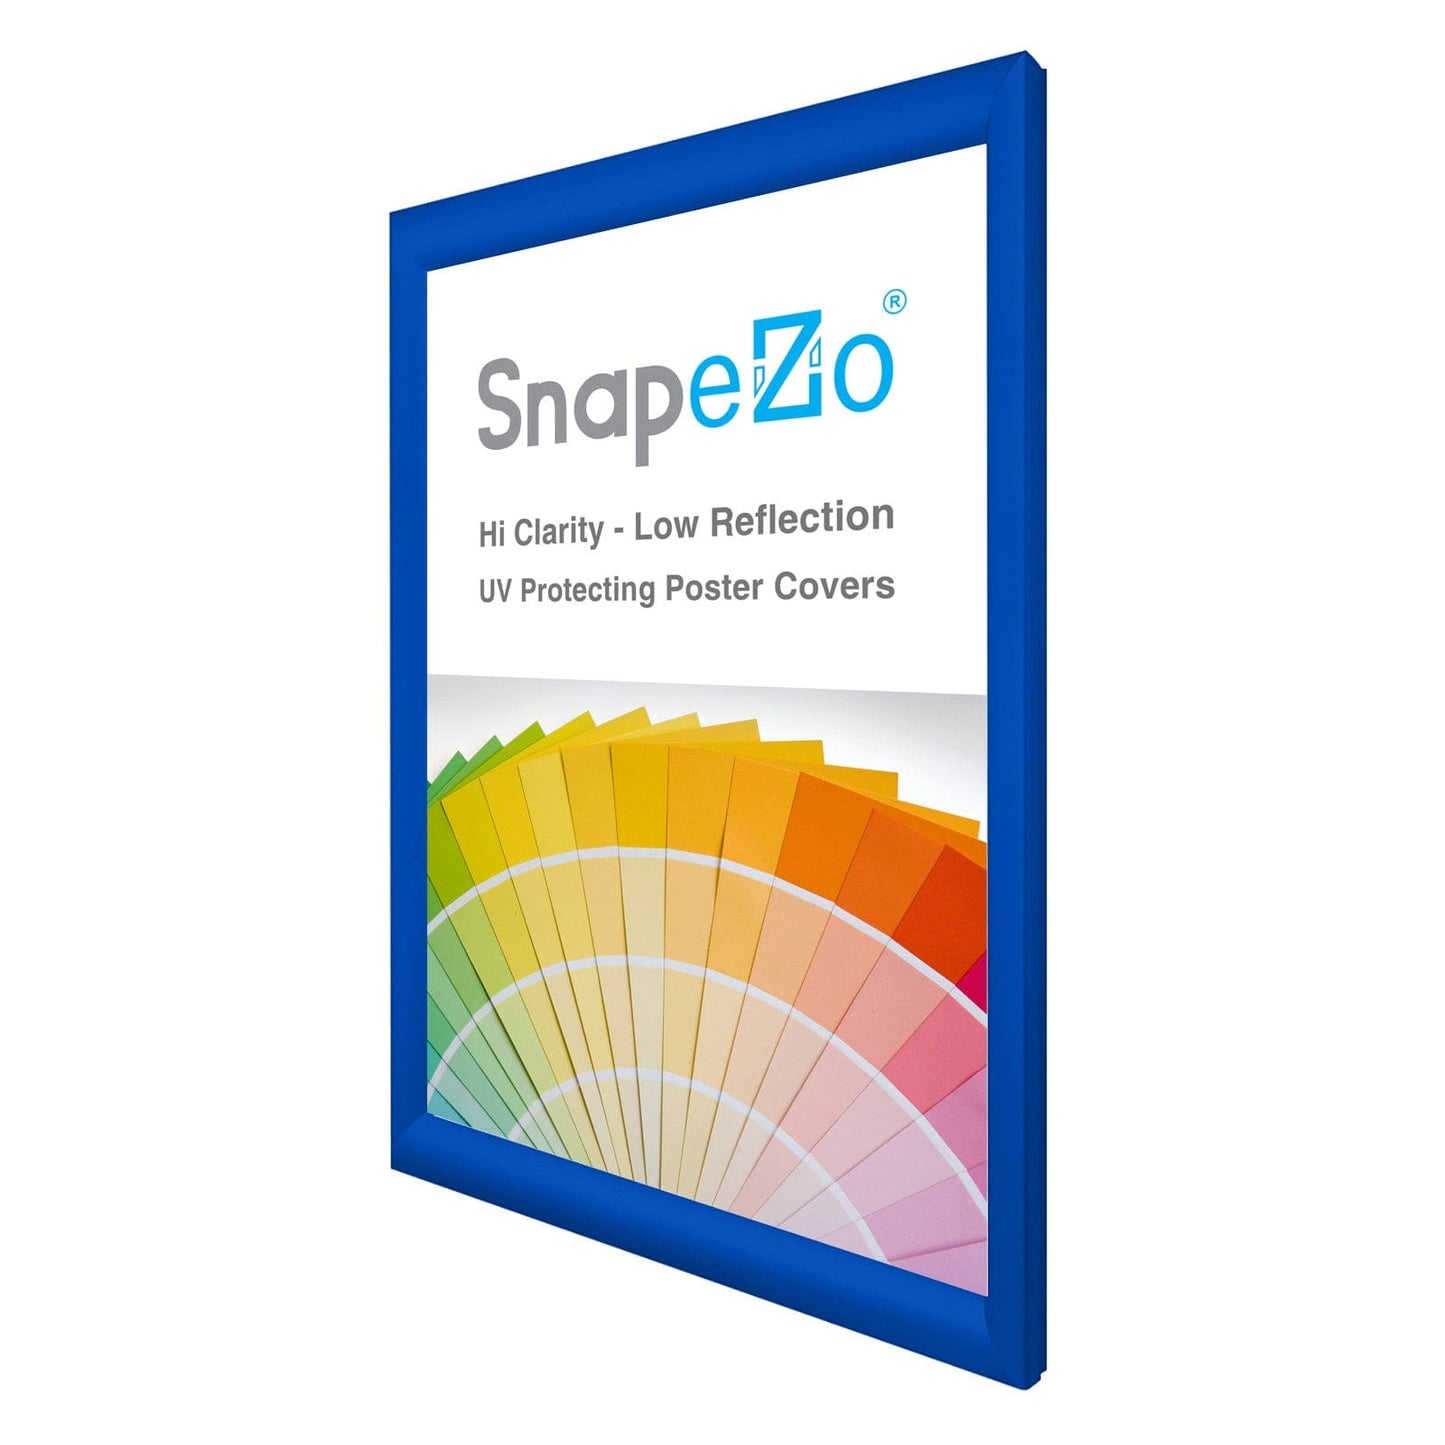 15x23 Blue SnapeZo® Snap Frame - 1.2" Profile - Snap Frames Direct